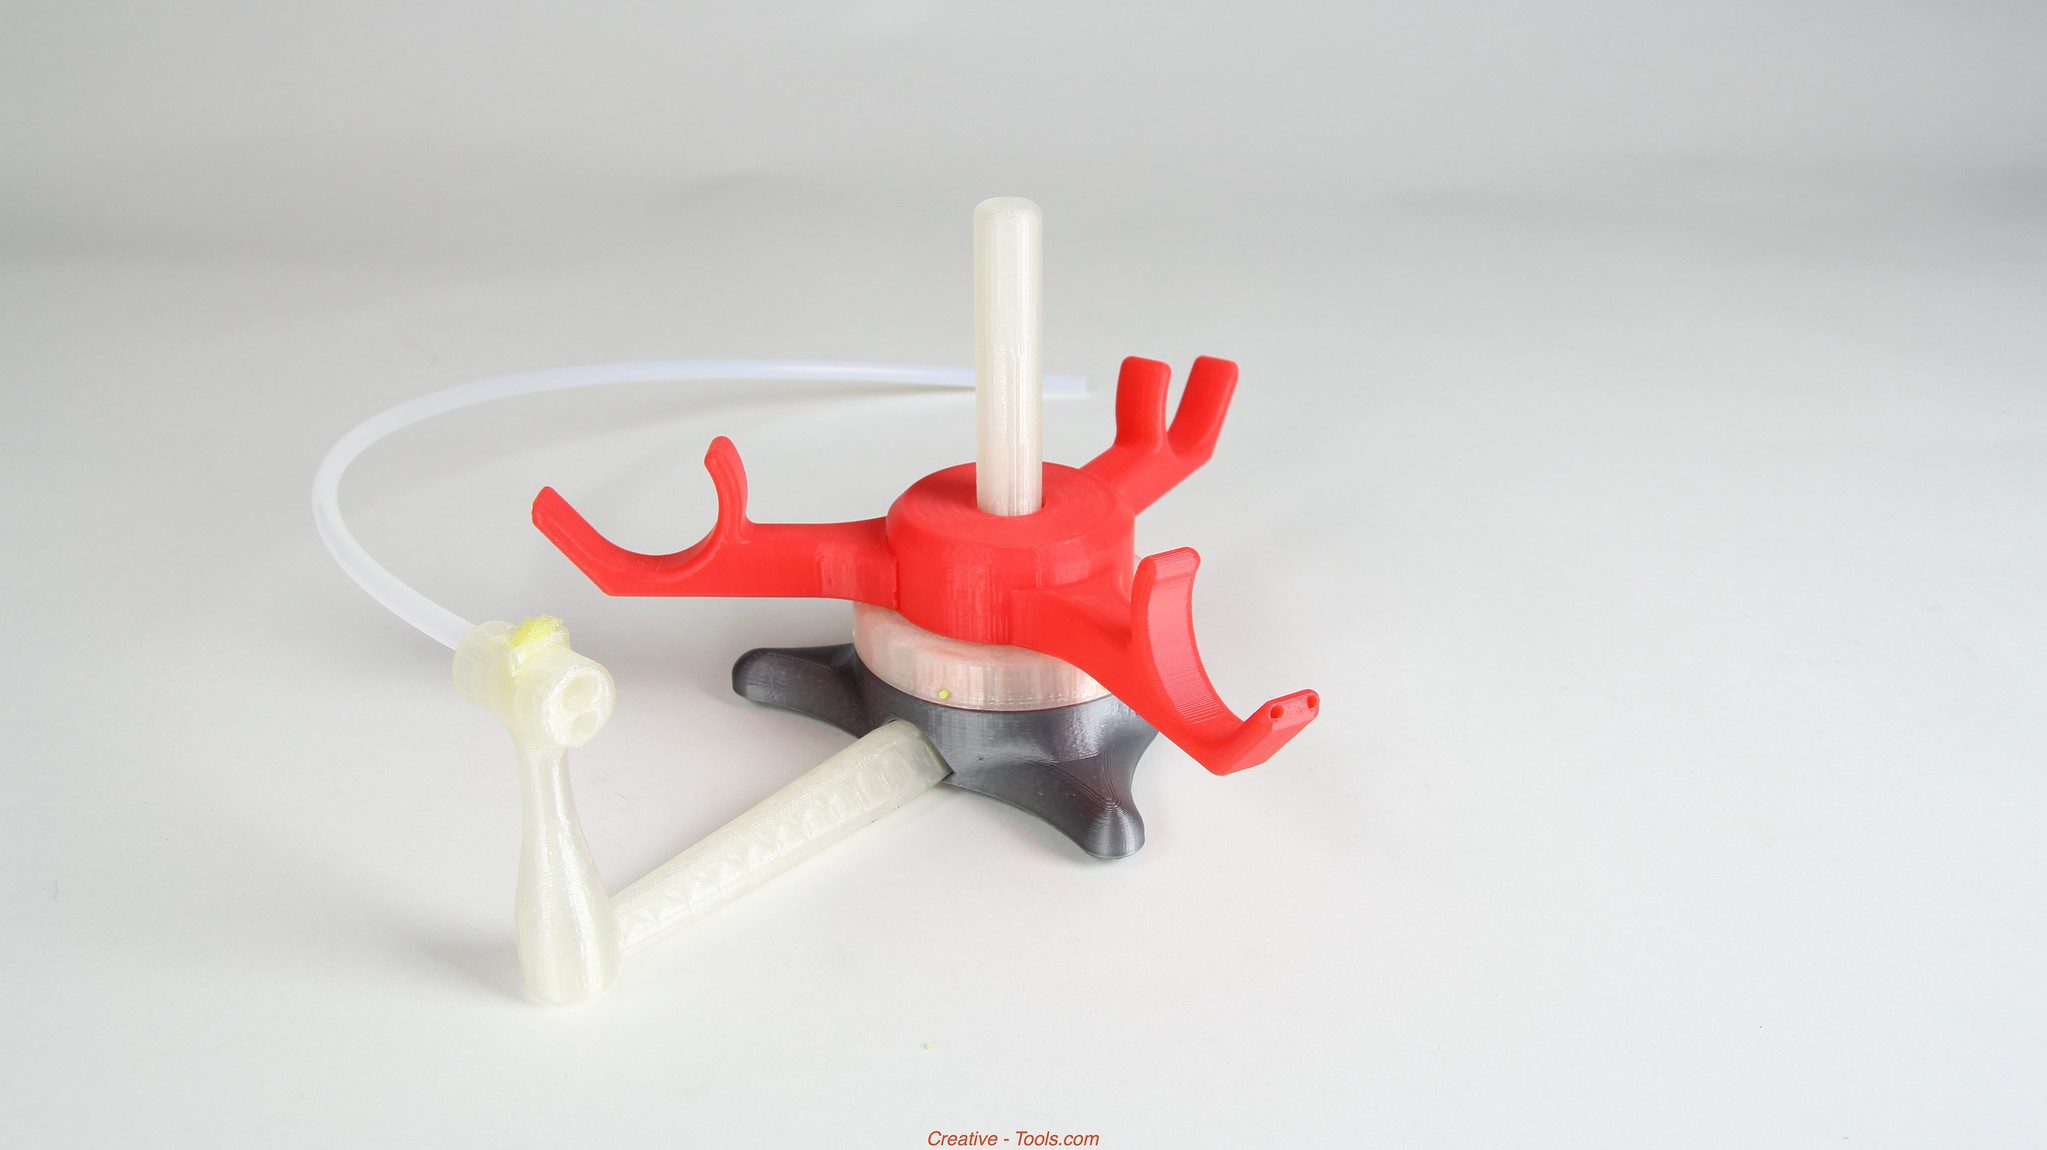 3D Printed Specialized Model Stand